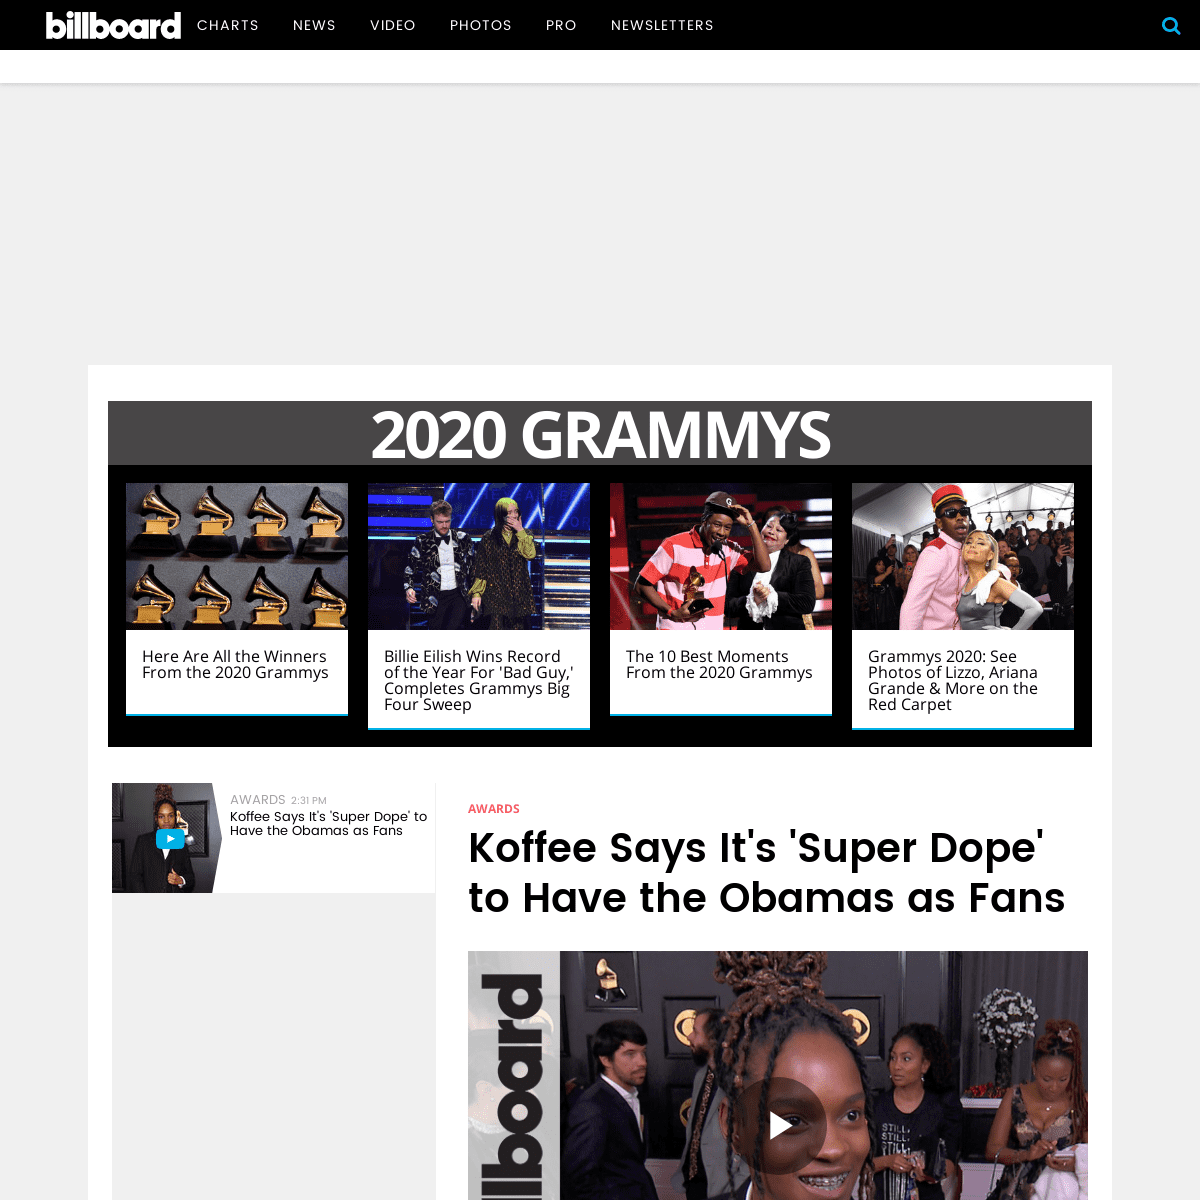 A complete backup of www.billboard.com/articles/news/awards/8549338/koffee-grammys-2020-interview-obamas-fans